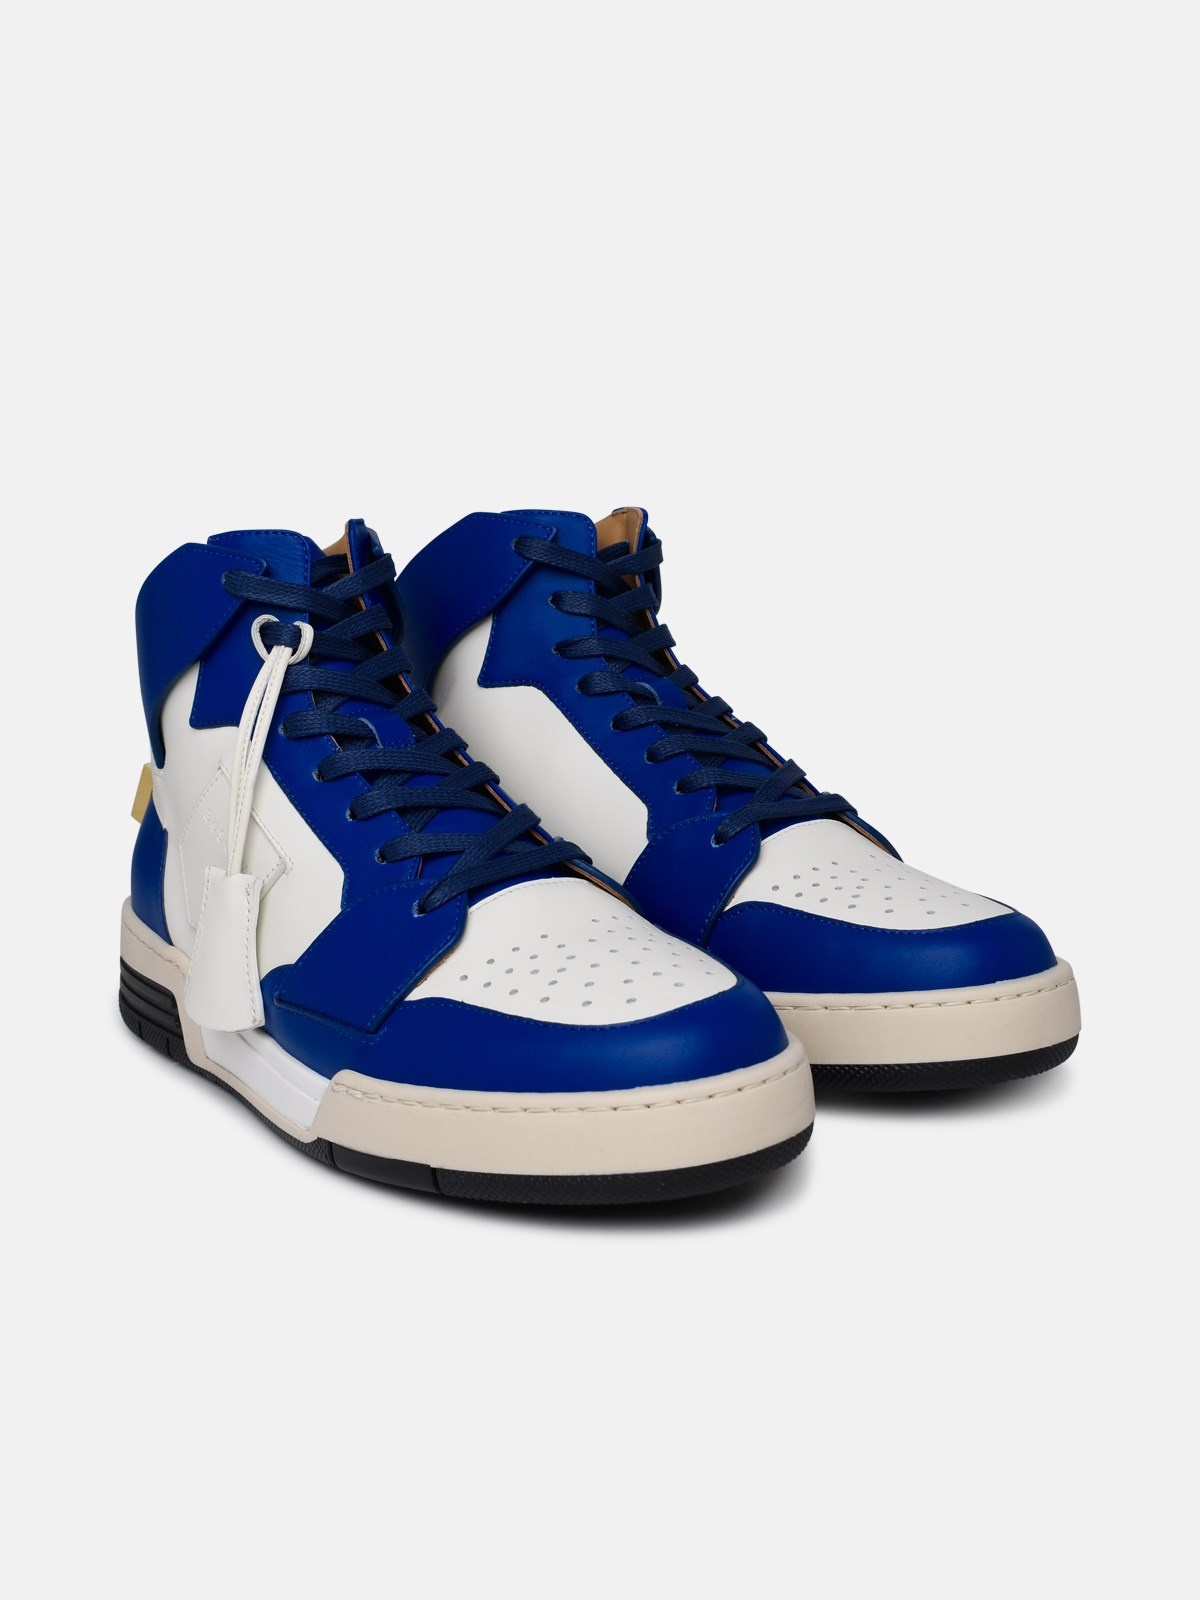 'AIR JON' WHITE AND BLUE LEATHER SNEAKERS - 2